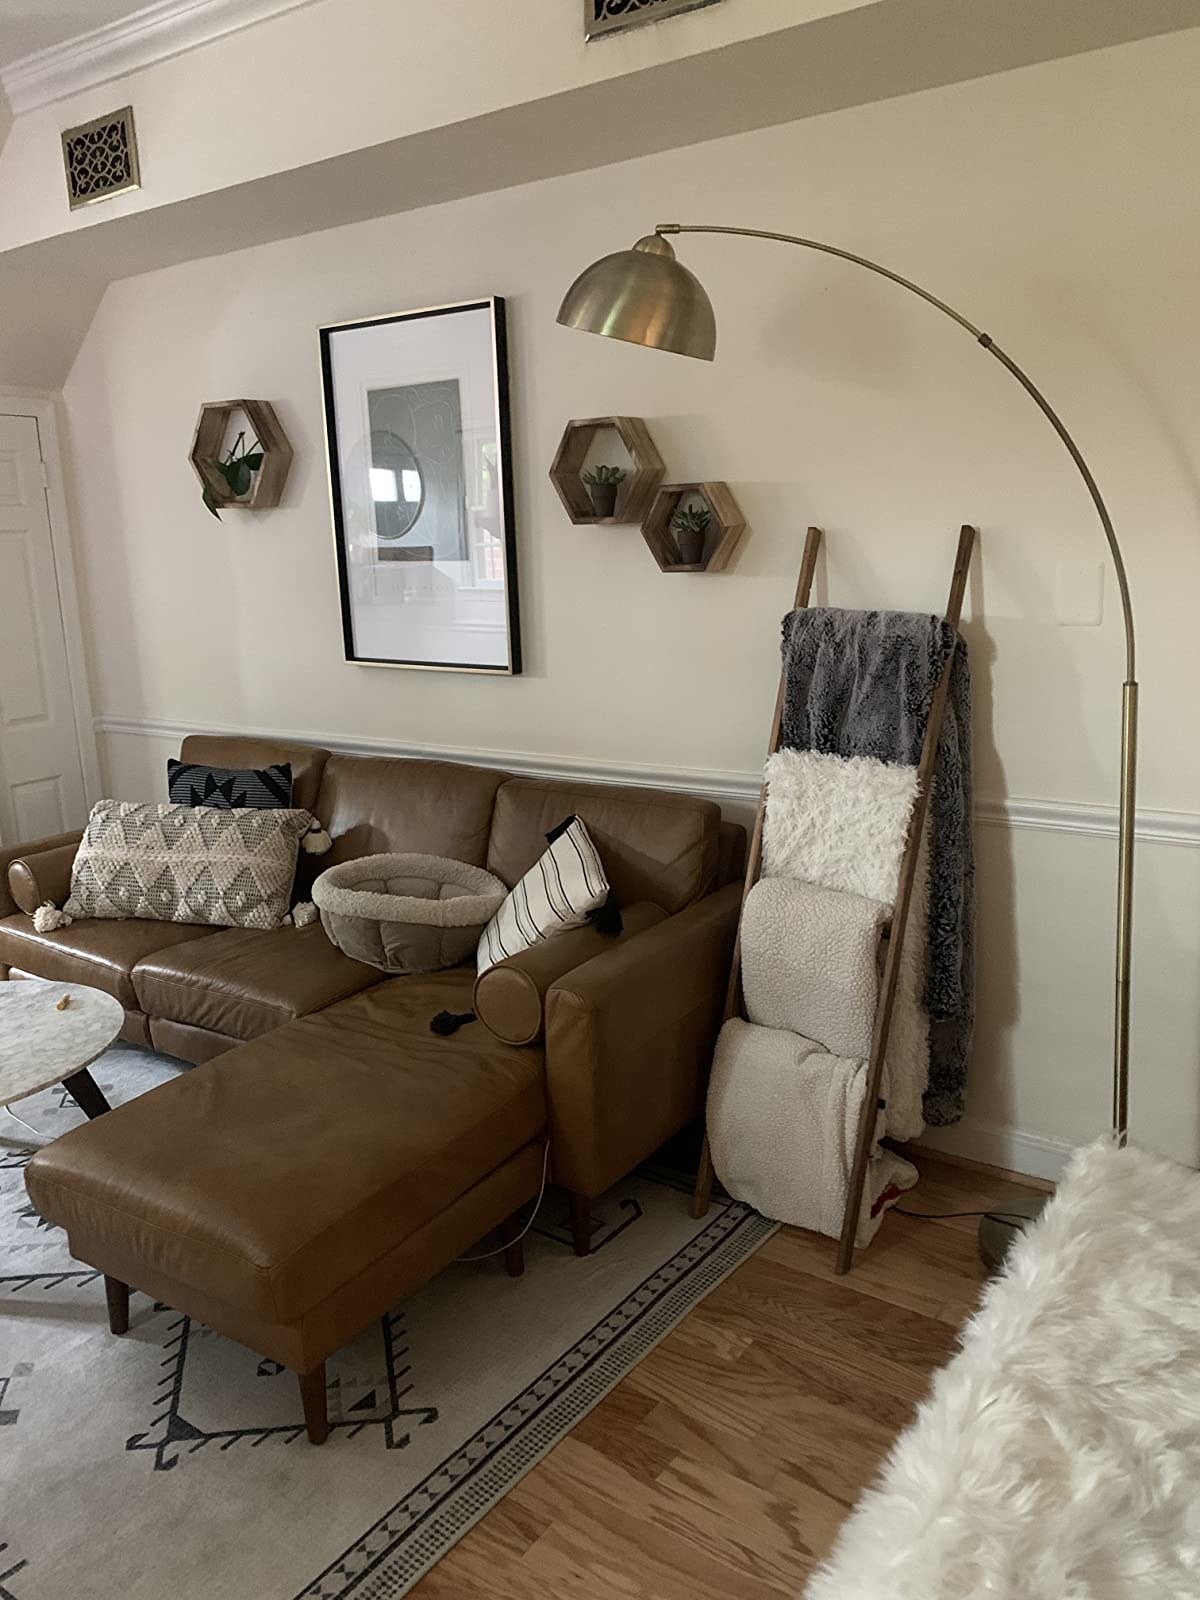 Reviewer image of lamp in a living room next to blanket ladder and leather sectional